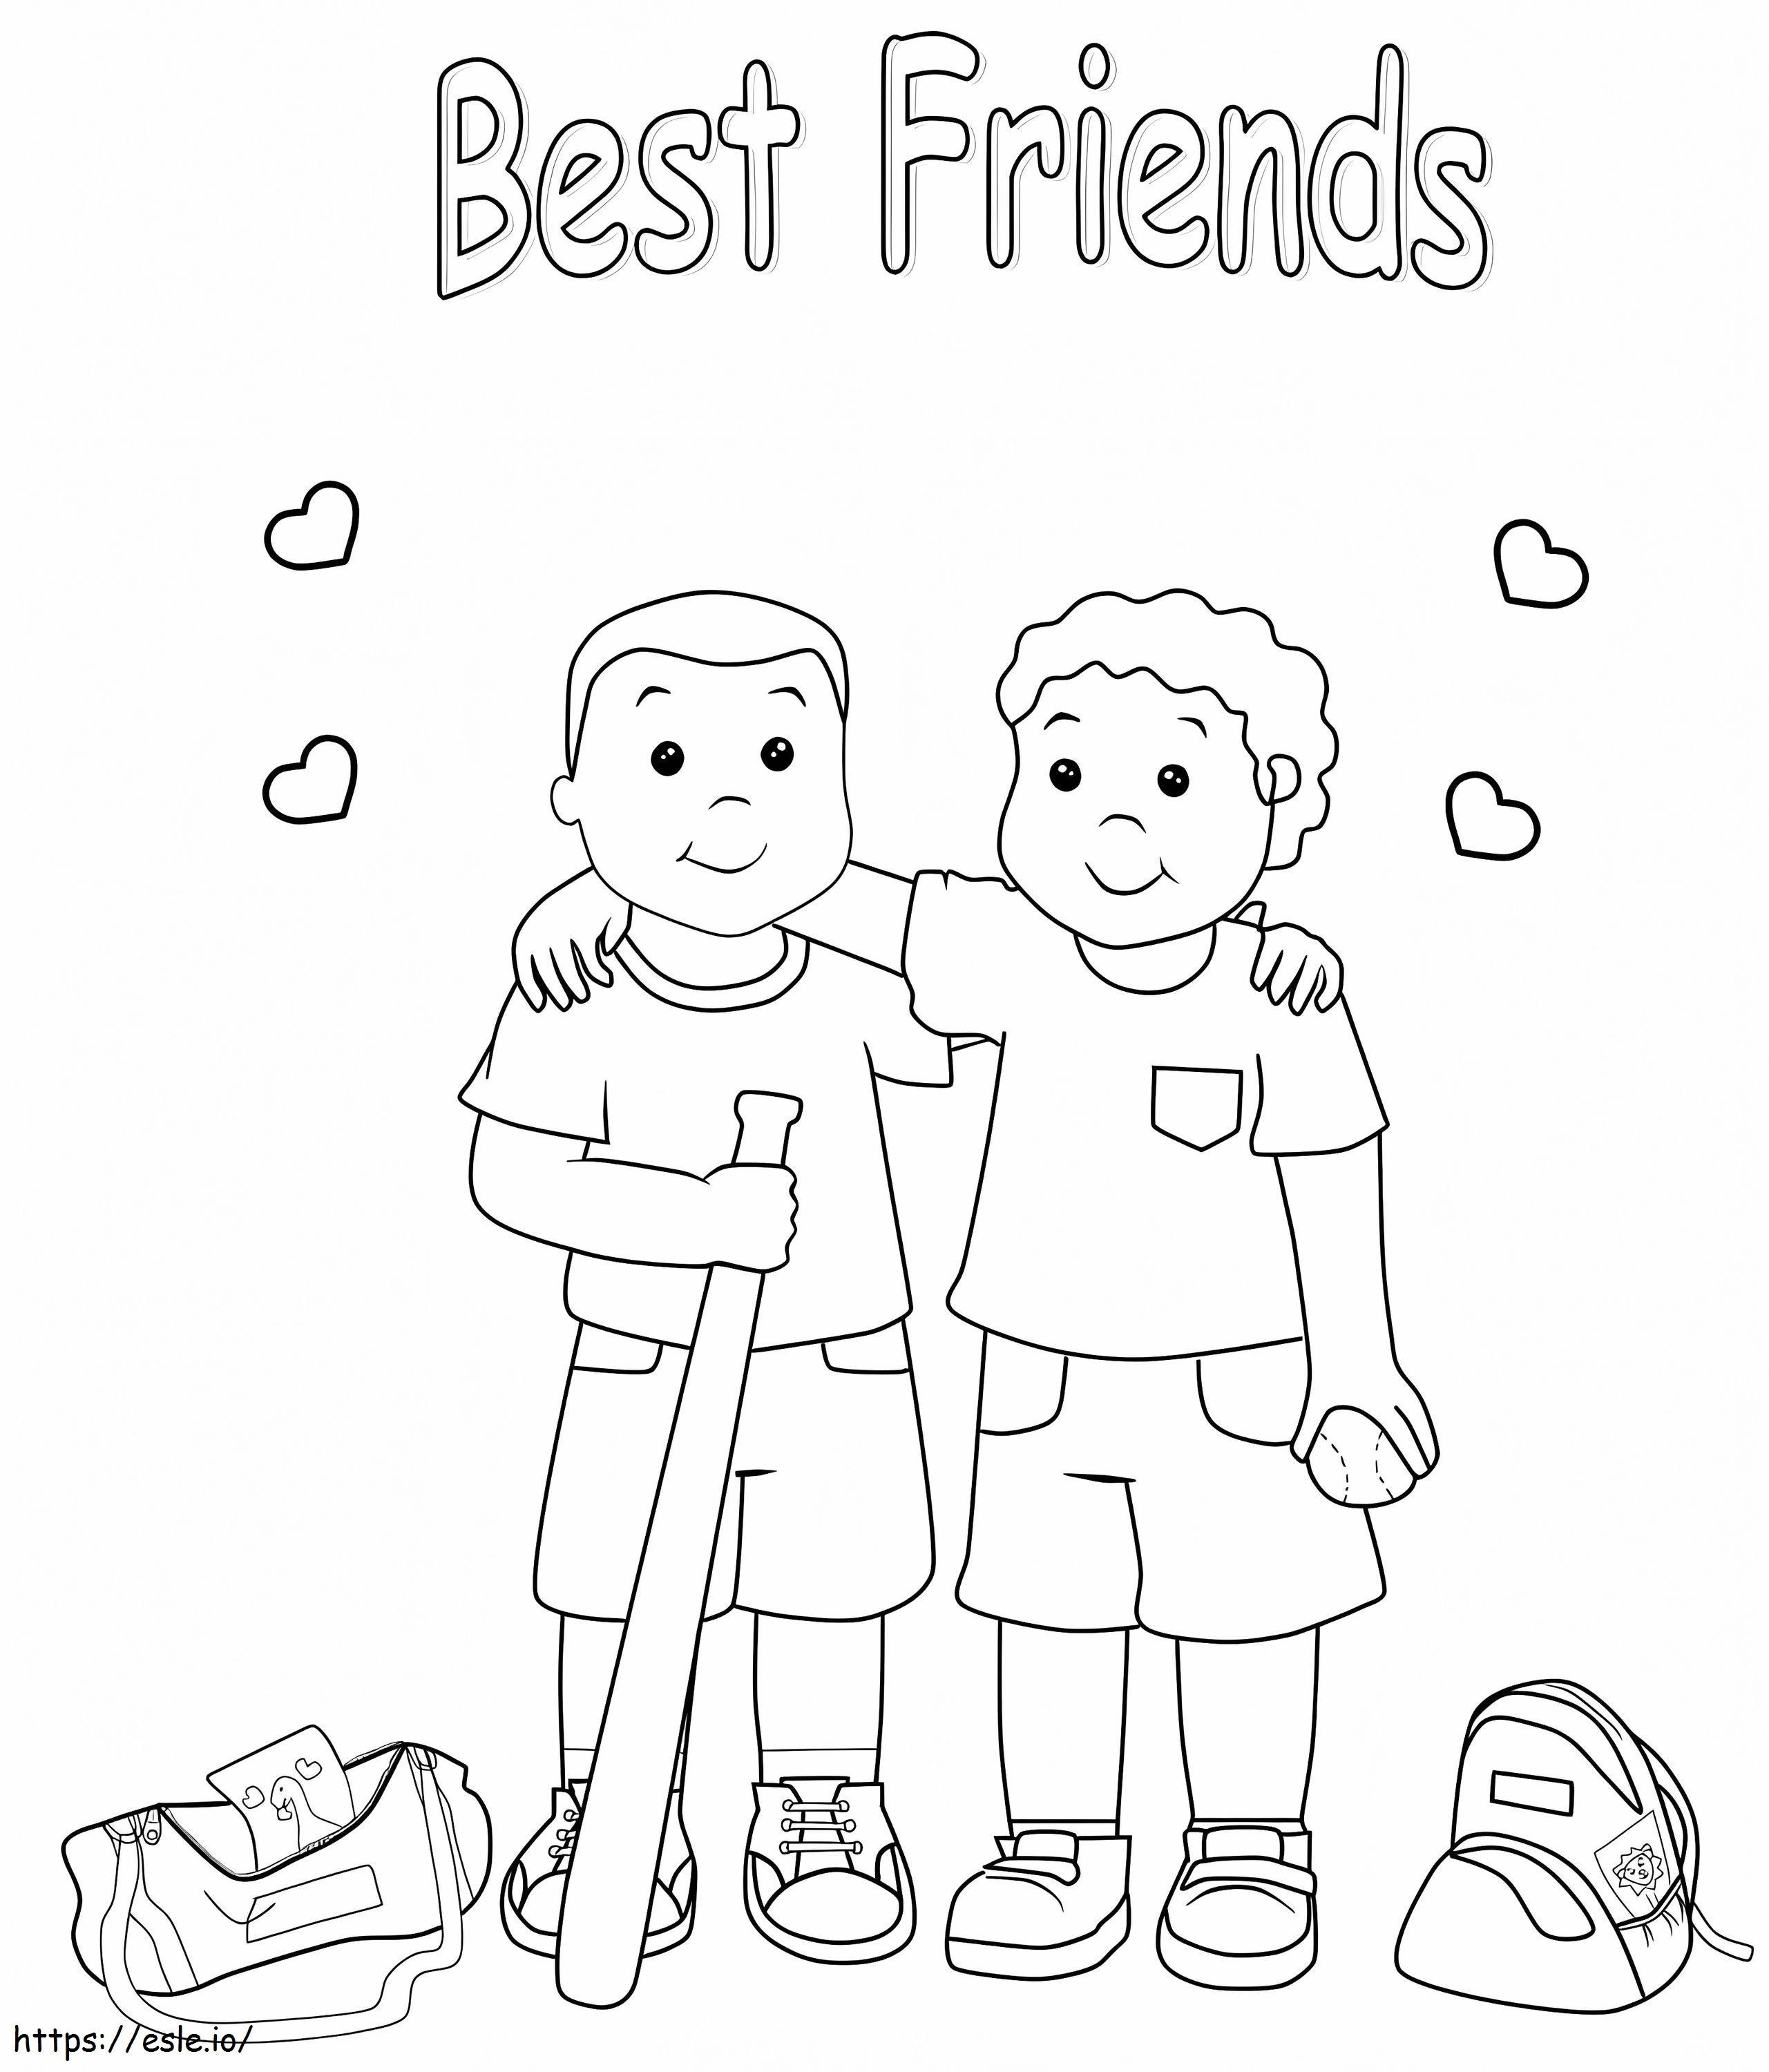 Best Friends 1 coloring page